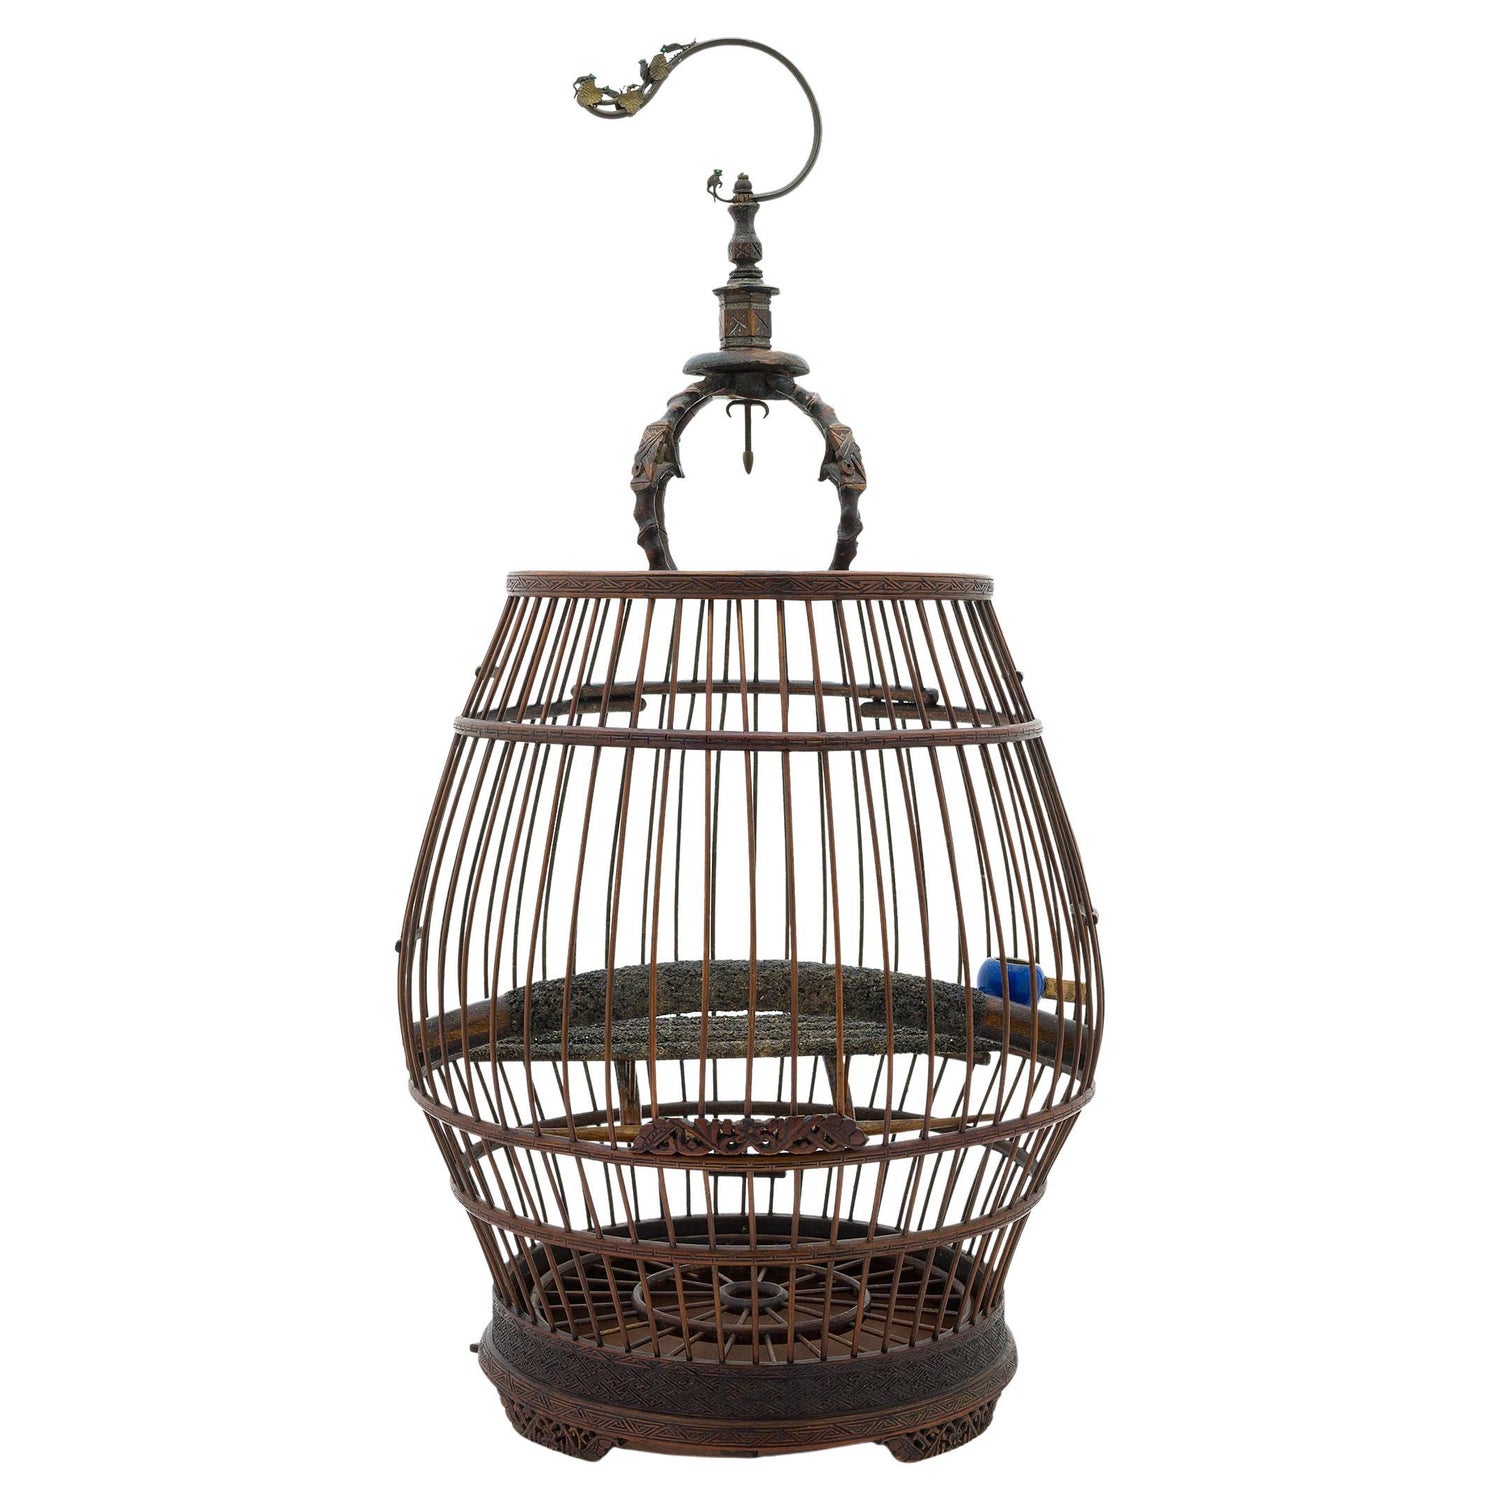 Chinese Woven Bamboo Birdcage For Sale at 1stDibs  vintage bamboo bird cage,  bamboo cages, bamboo bird cages